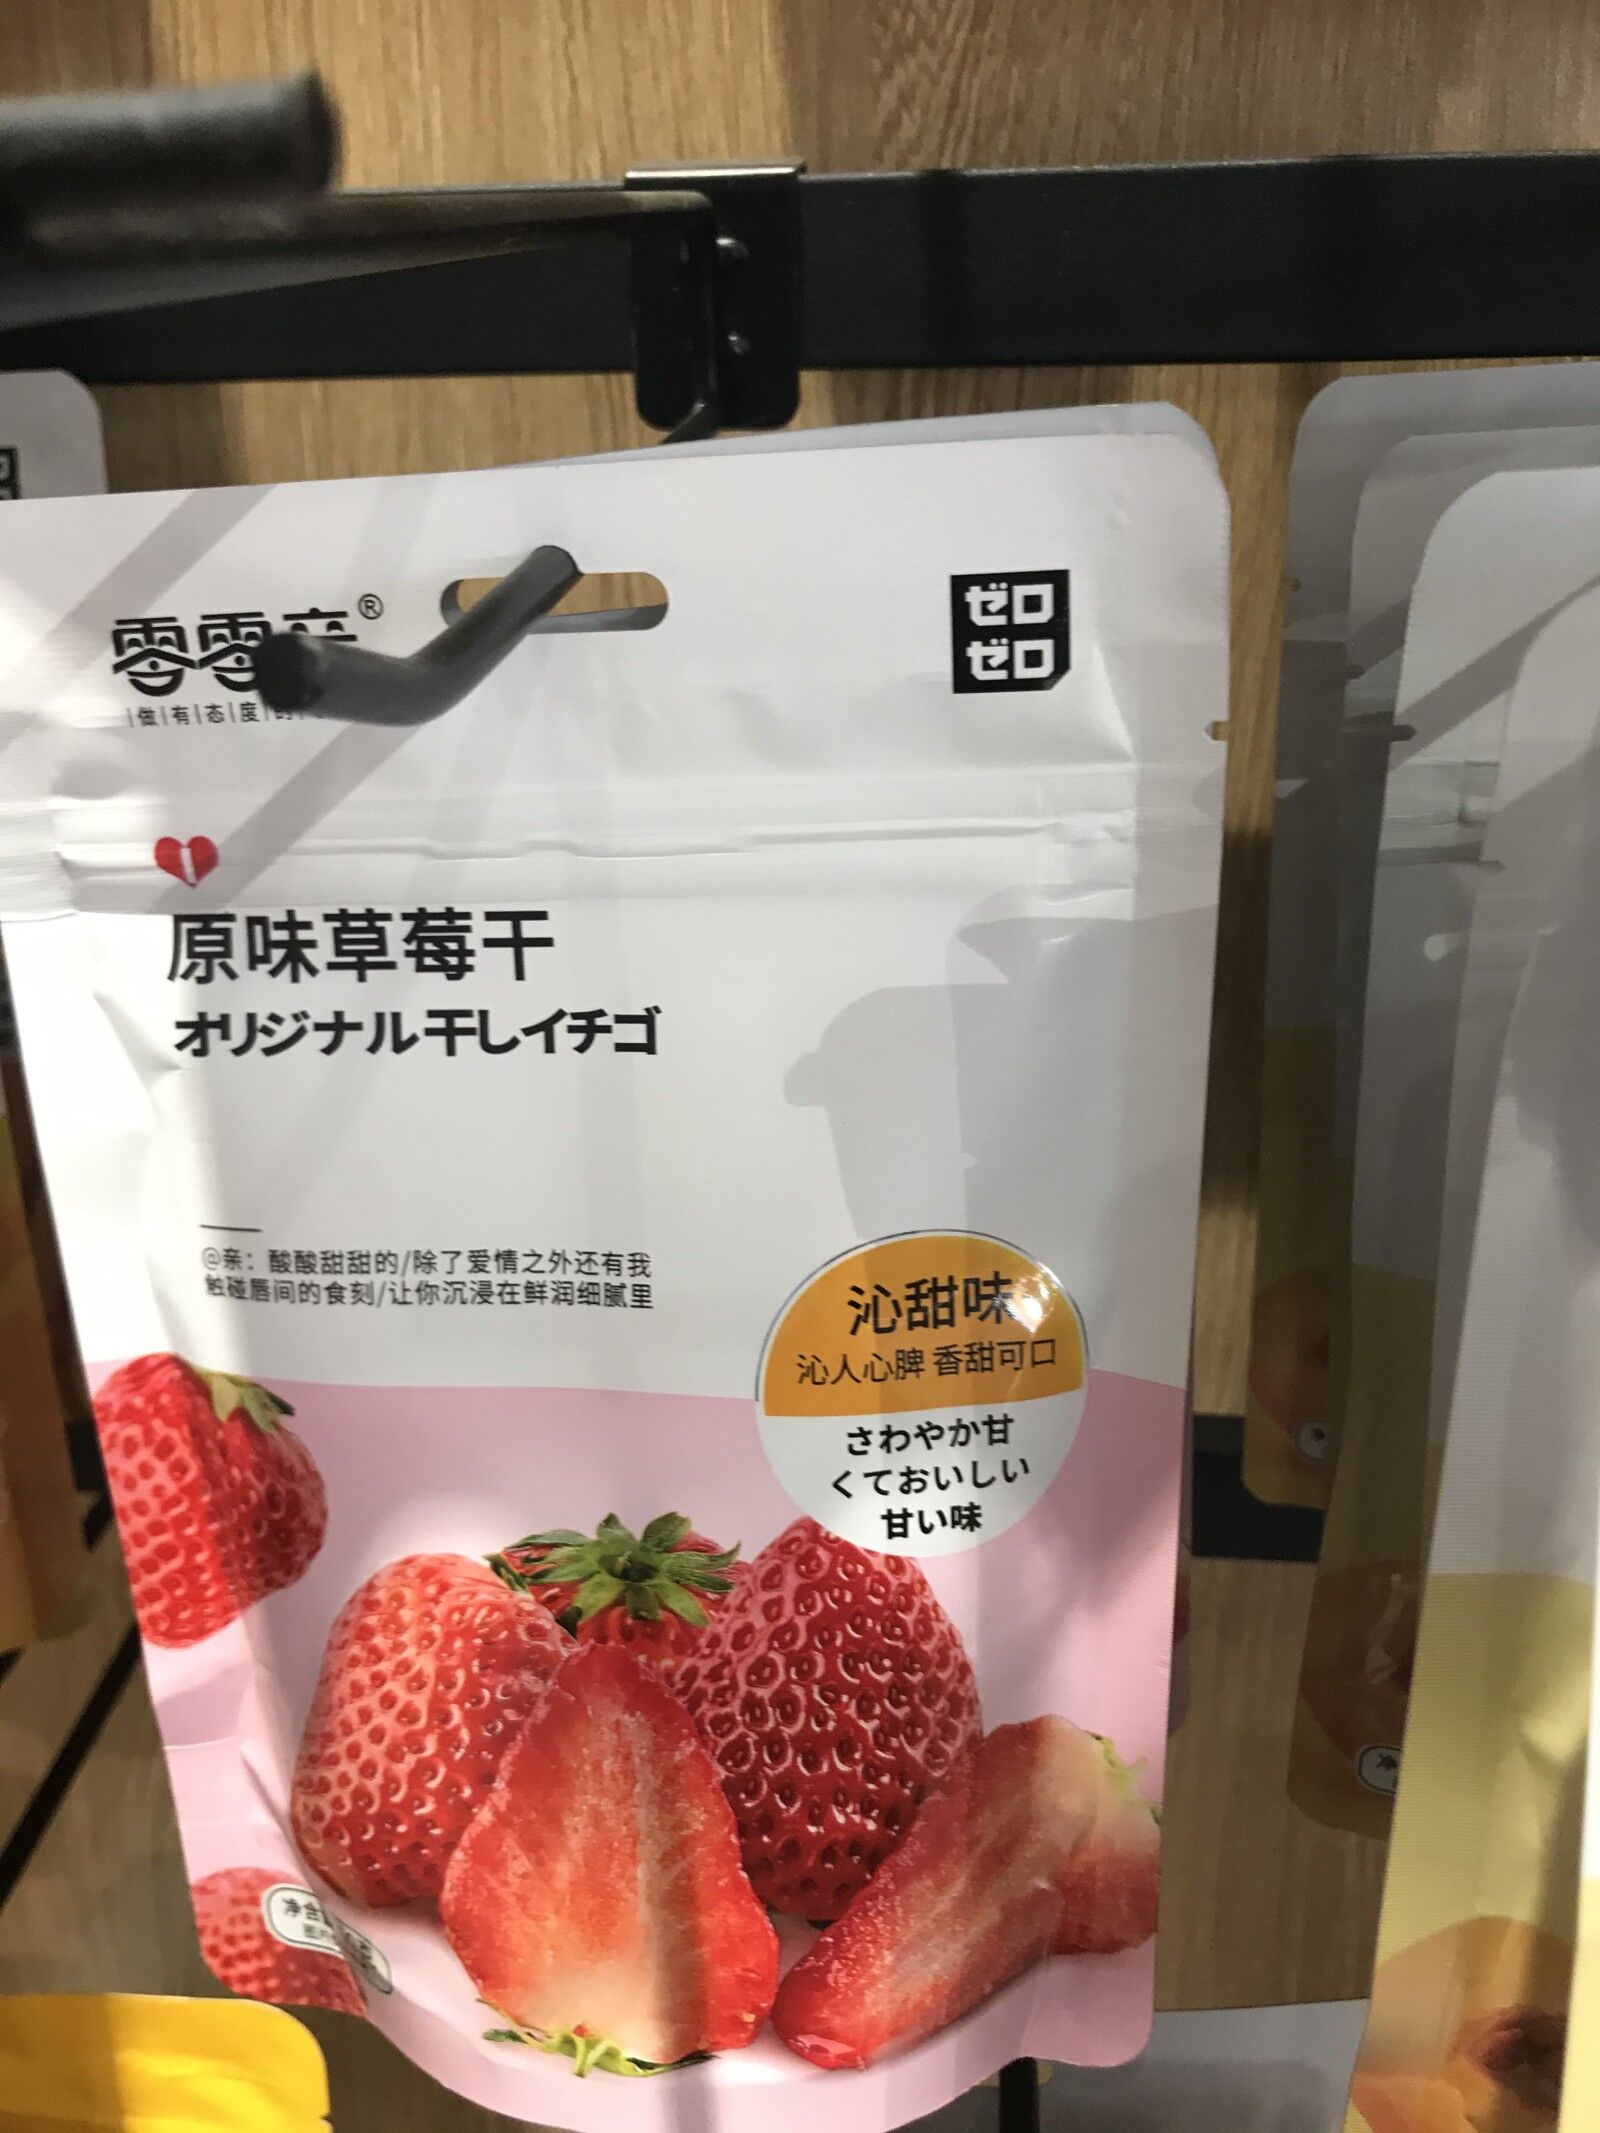 049 fruits: Dried strawberries 